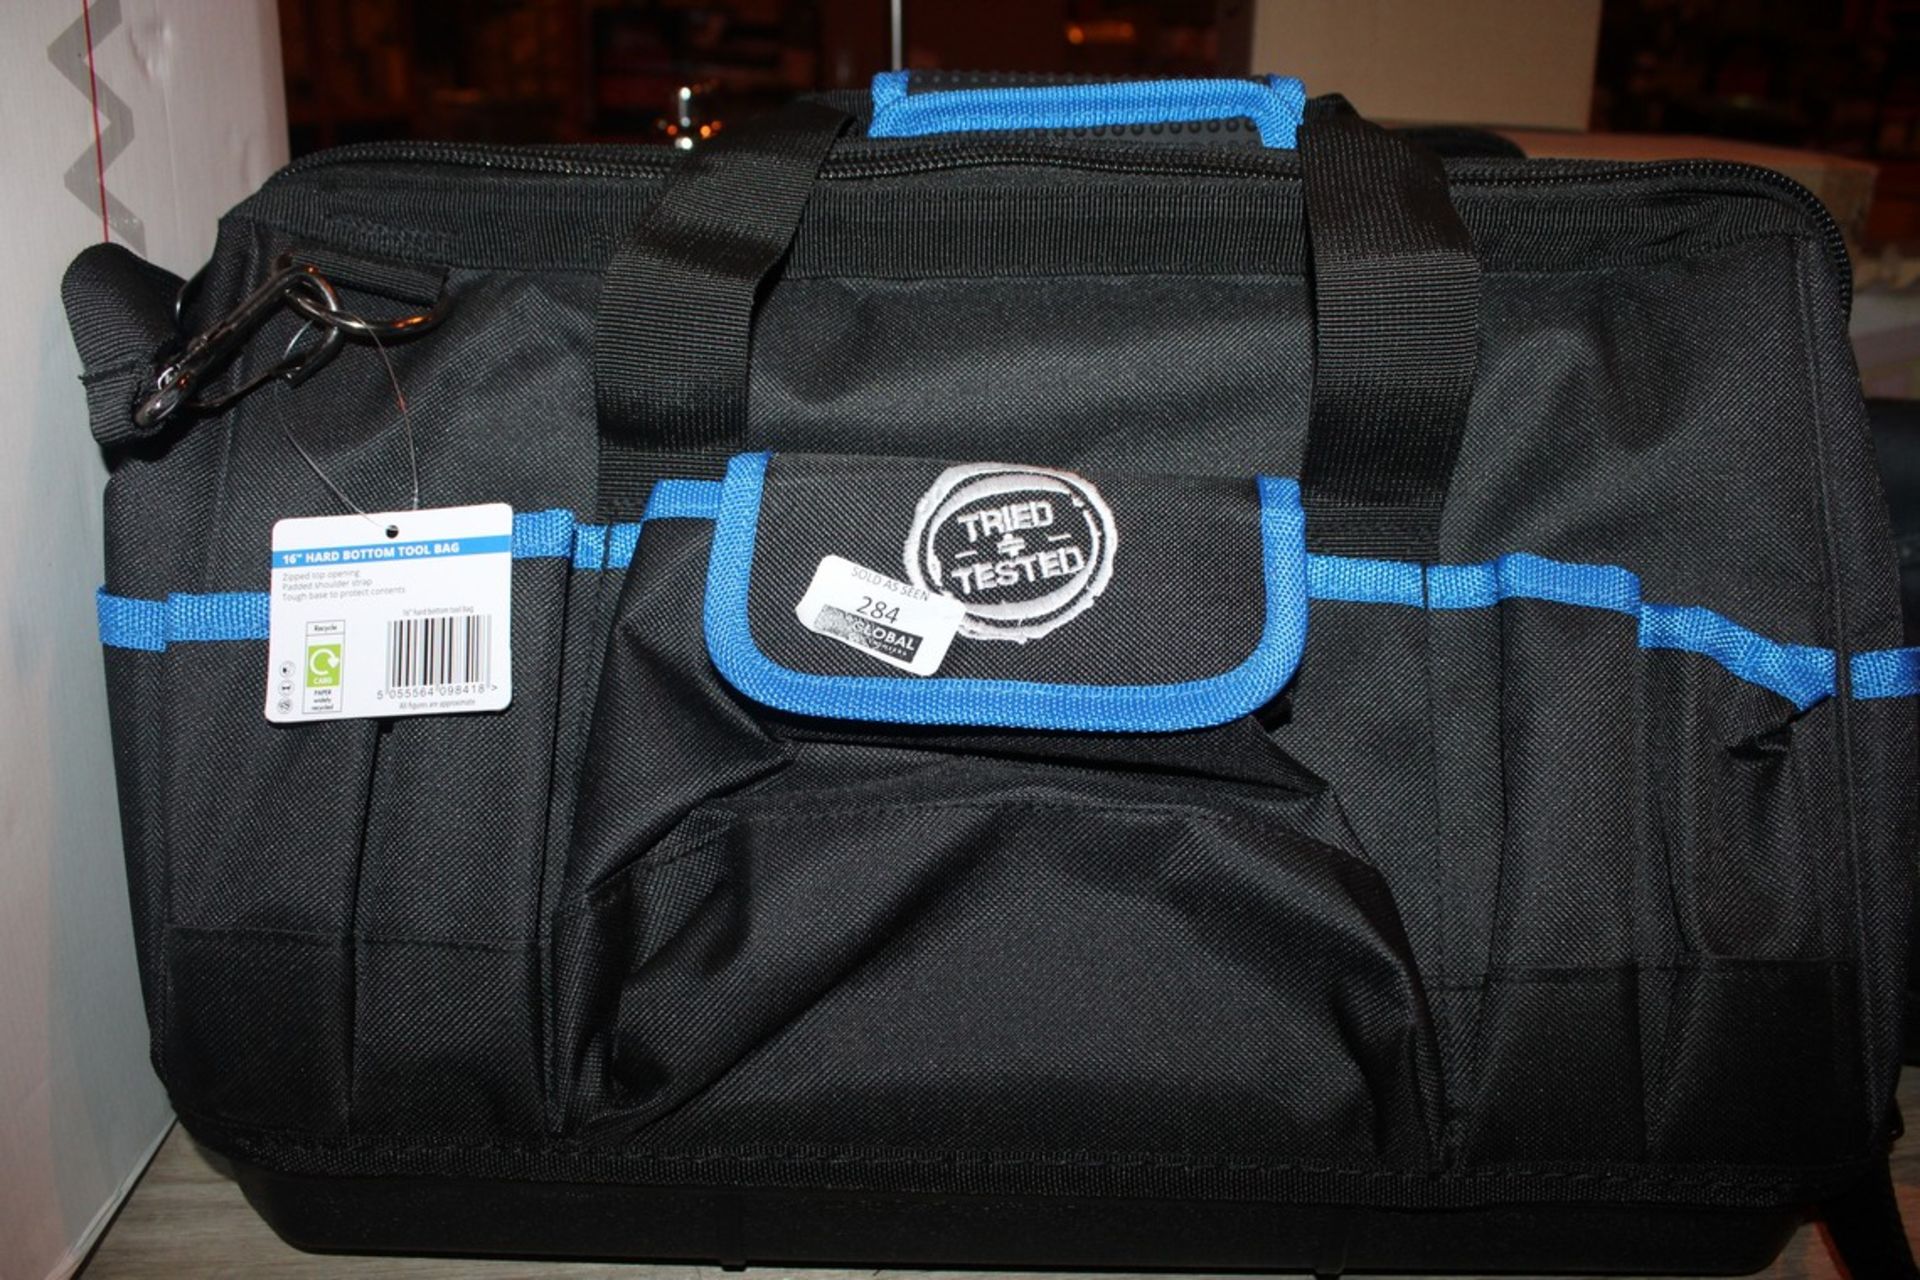 Lot to Contain 2 16Inch Brand New Tried and Tested Hard Bottom GT150 Tool Bags Combined RRP £50